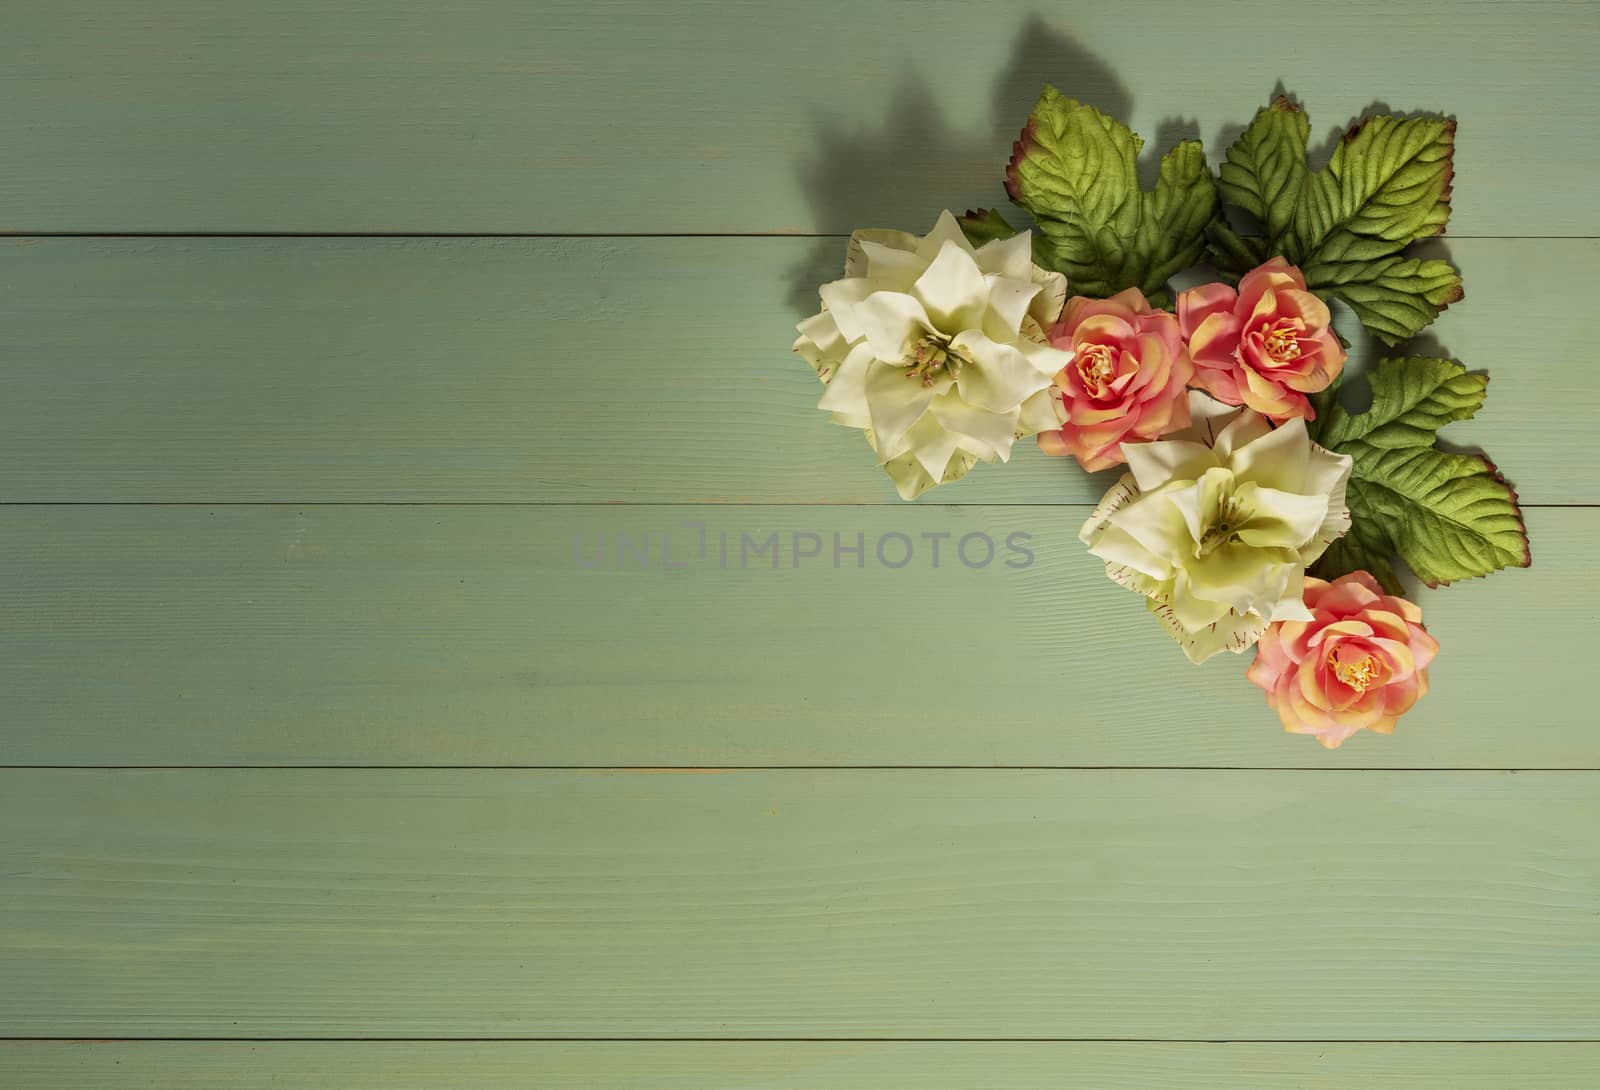 top view beautiful flowers with leaves on wooden background